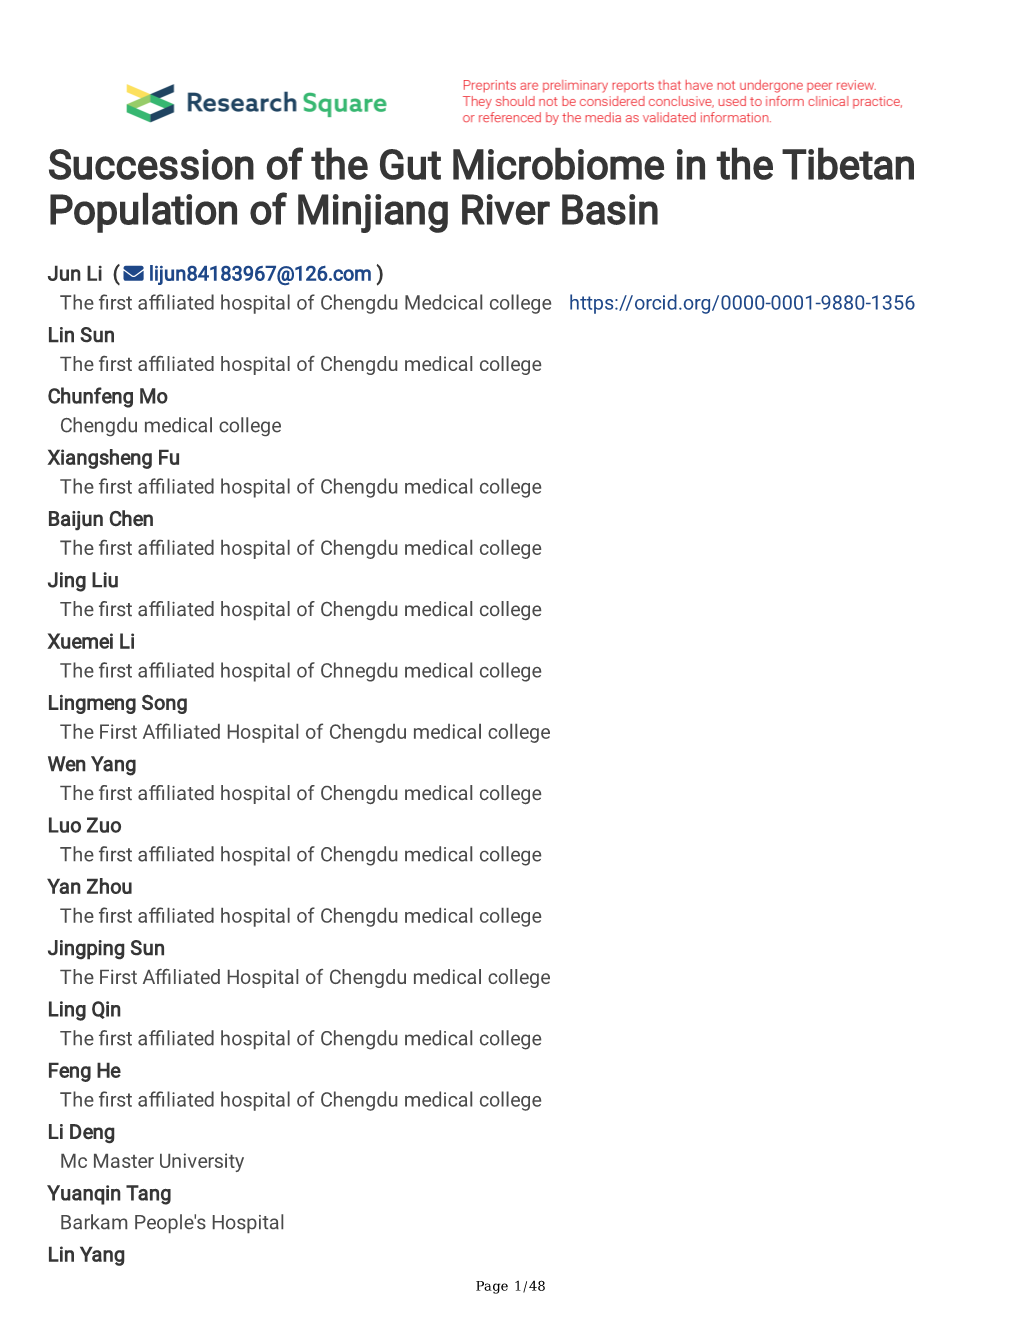 Succession of the Gut Microbiome in the Tibetan Population of Minjiang River Basin